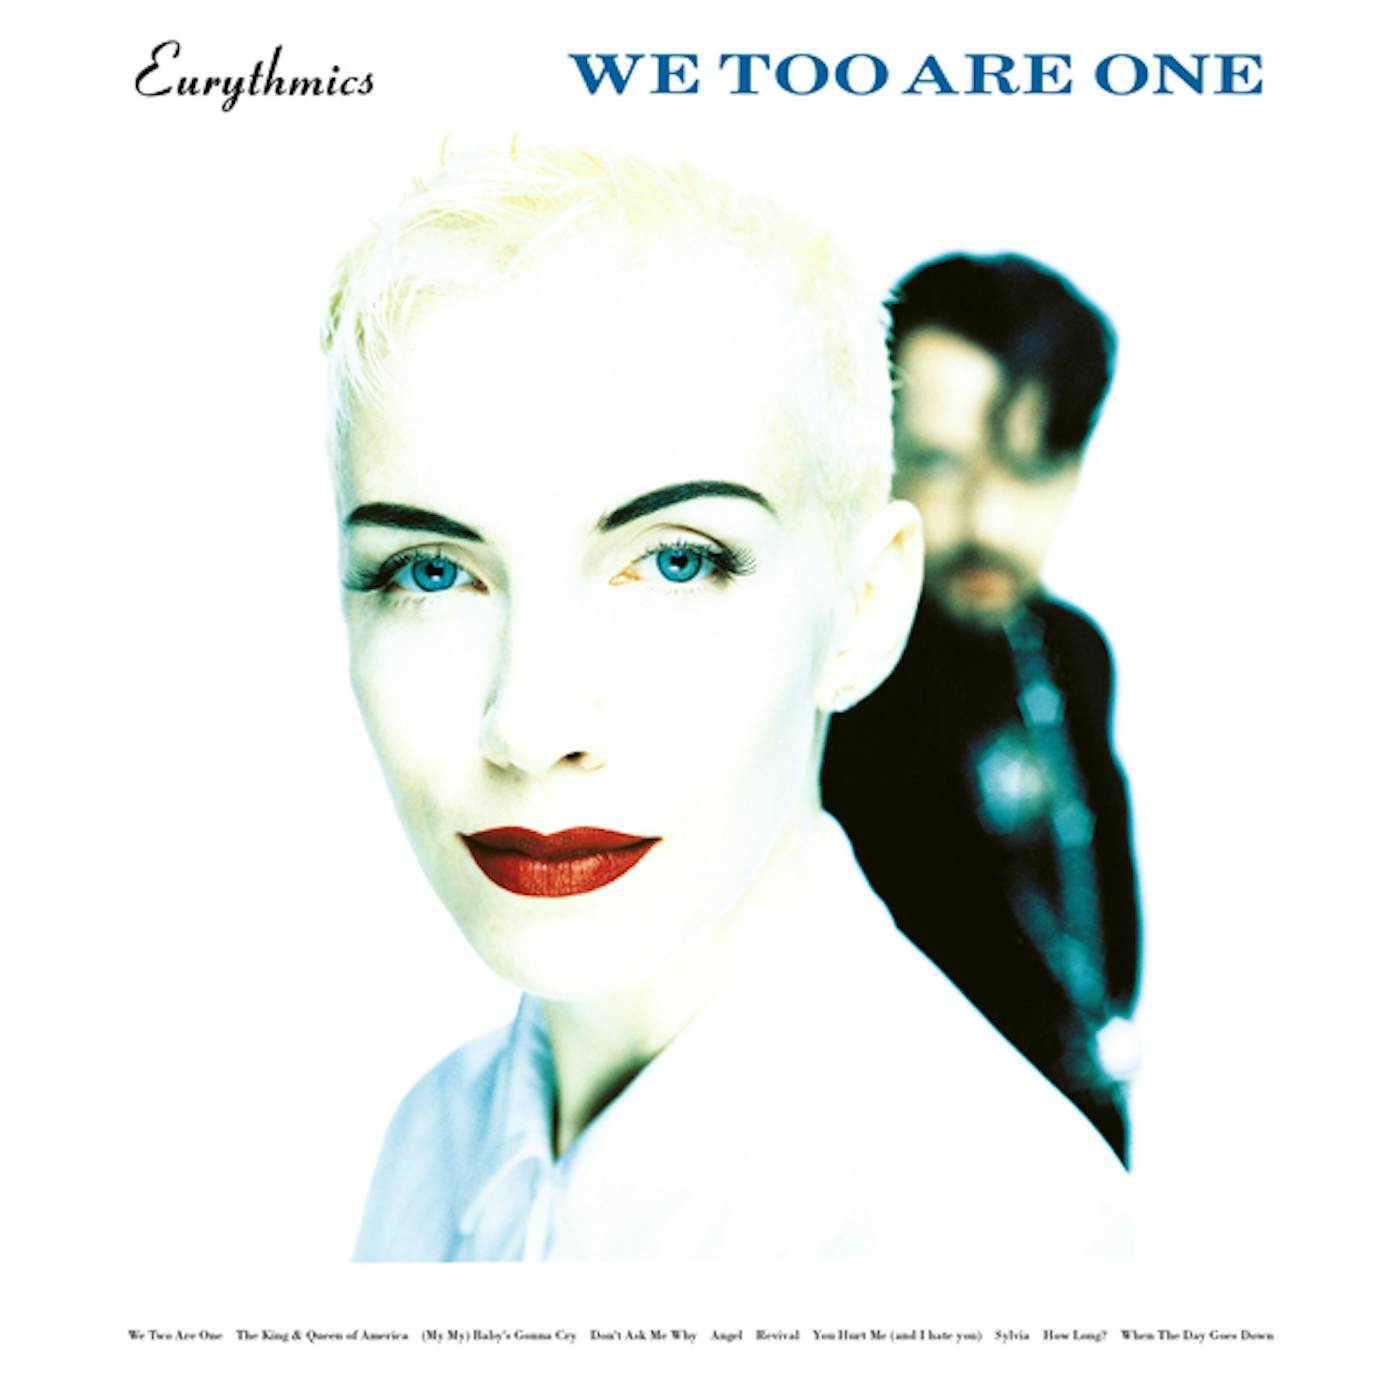 Eurythmics WE TOO ARE ONE (180G/DL CARD) Vinyl Record